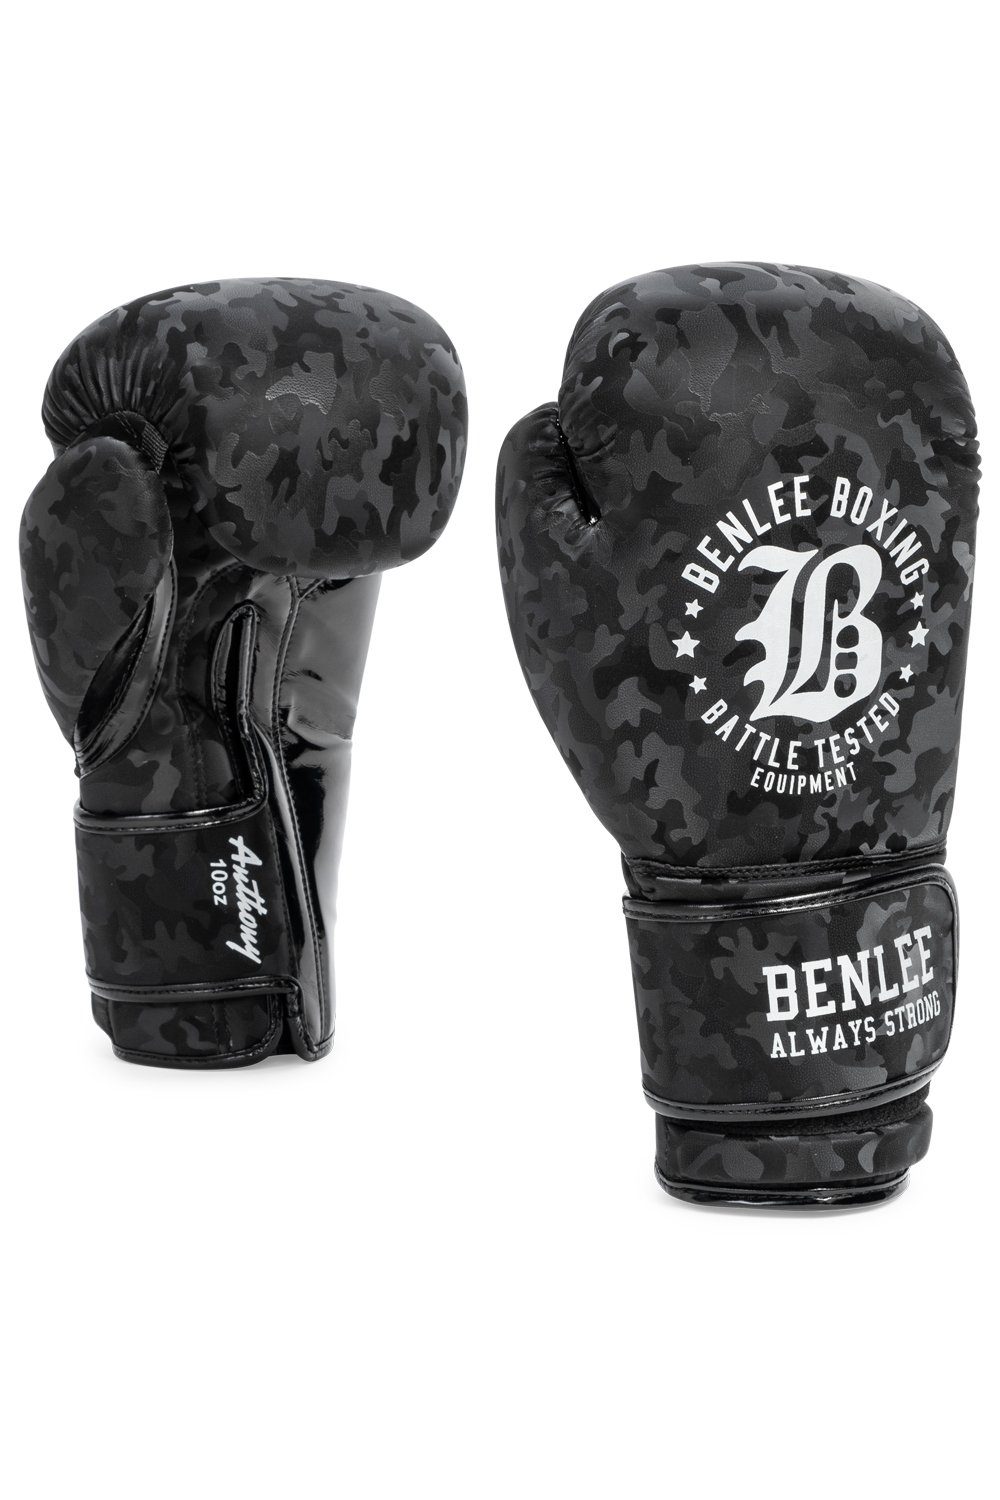 ANTHONY Boxhandschuhe Marciano Rocky Benlee